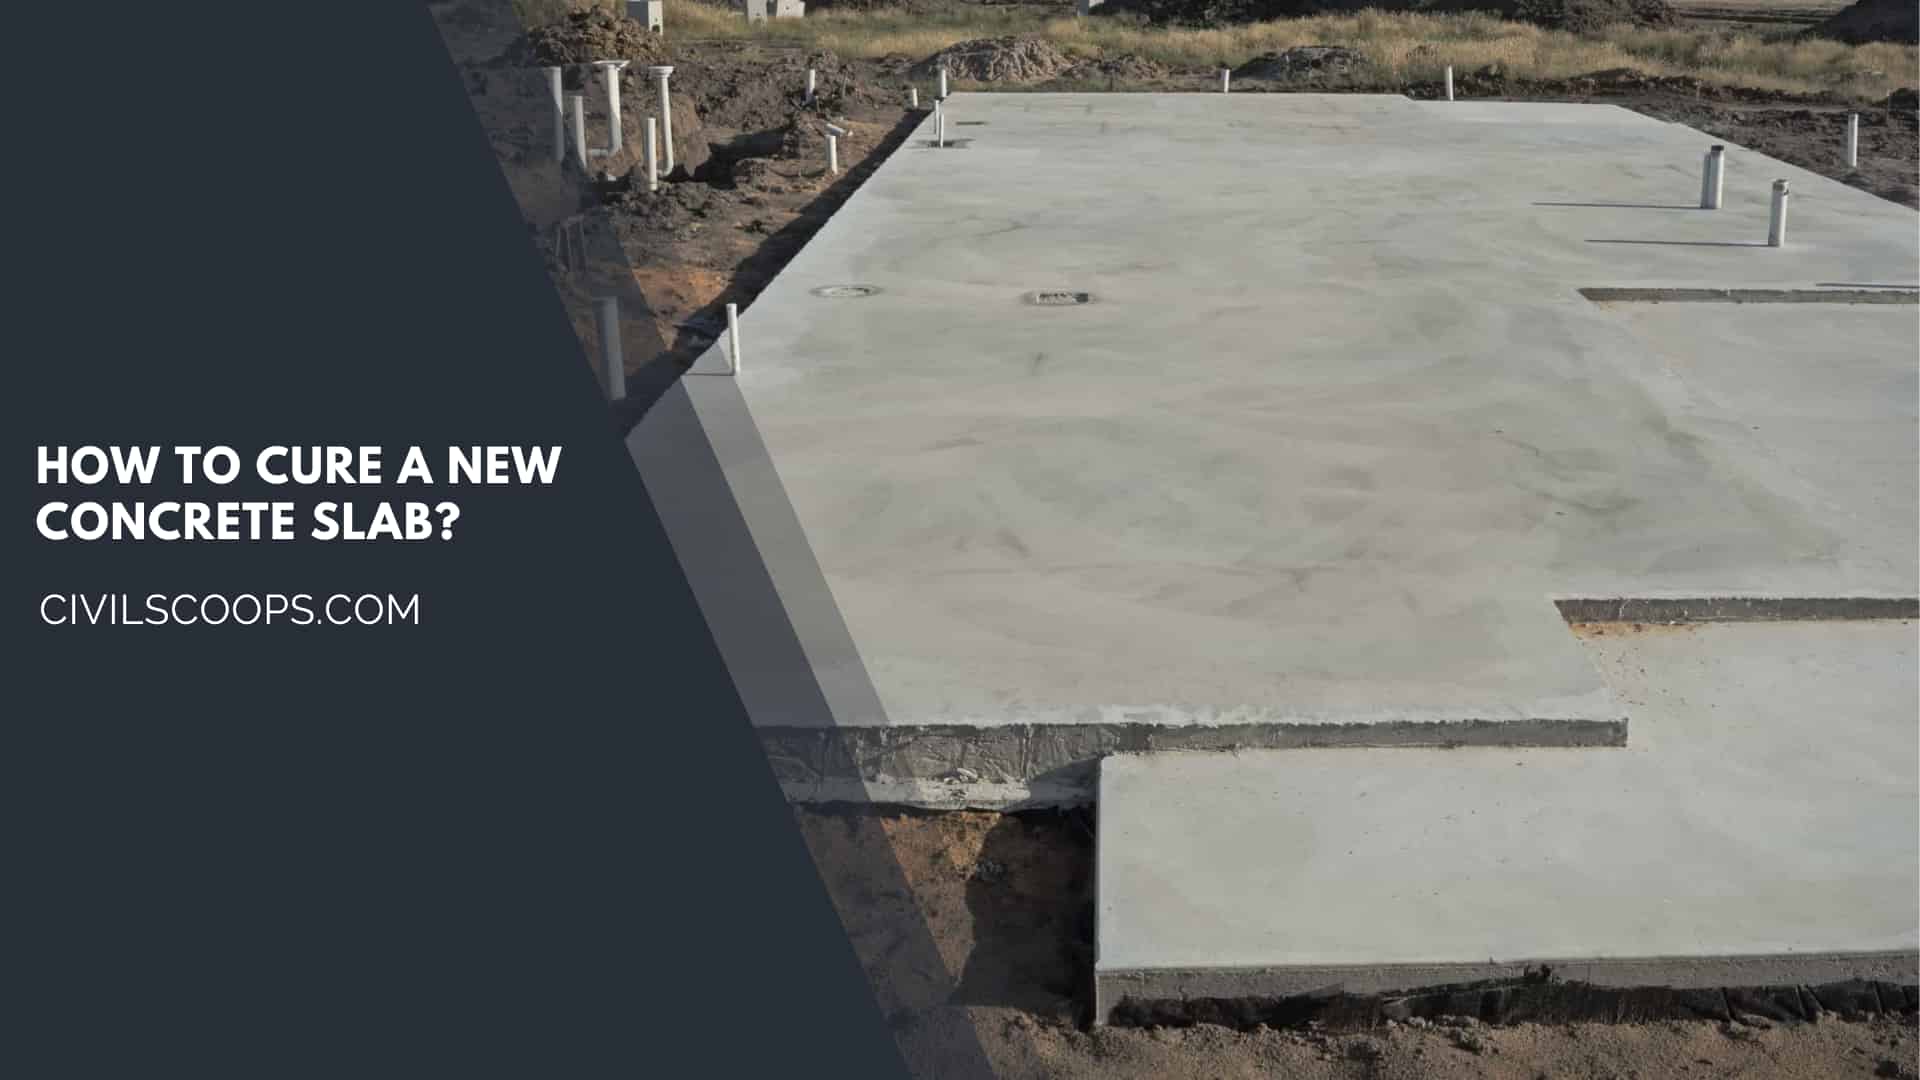 How to Cure a New Concrete Slab?